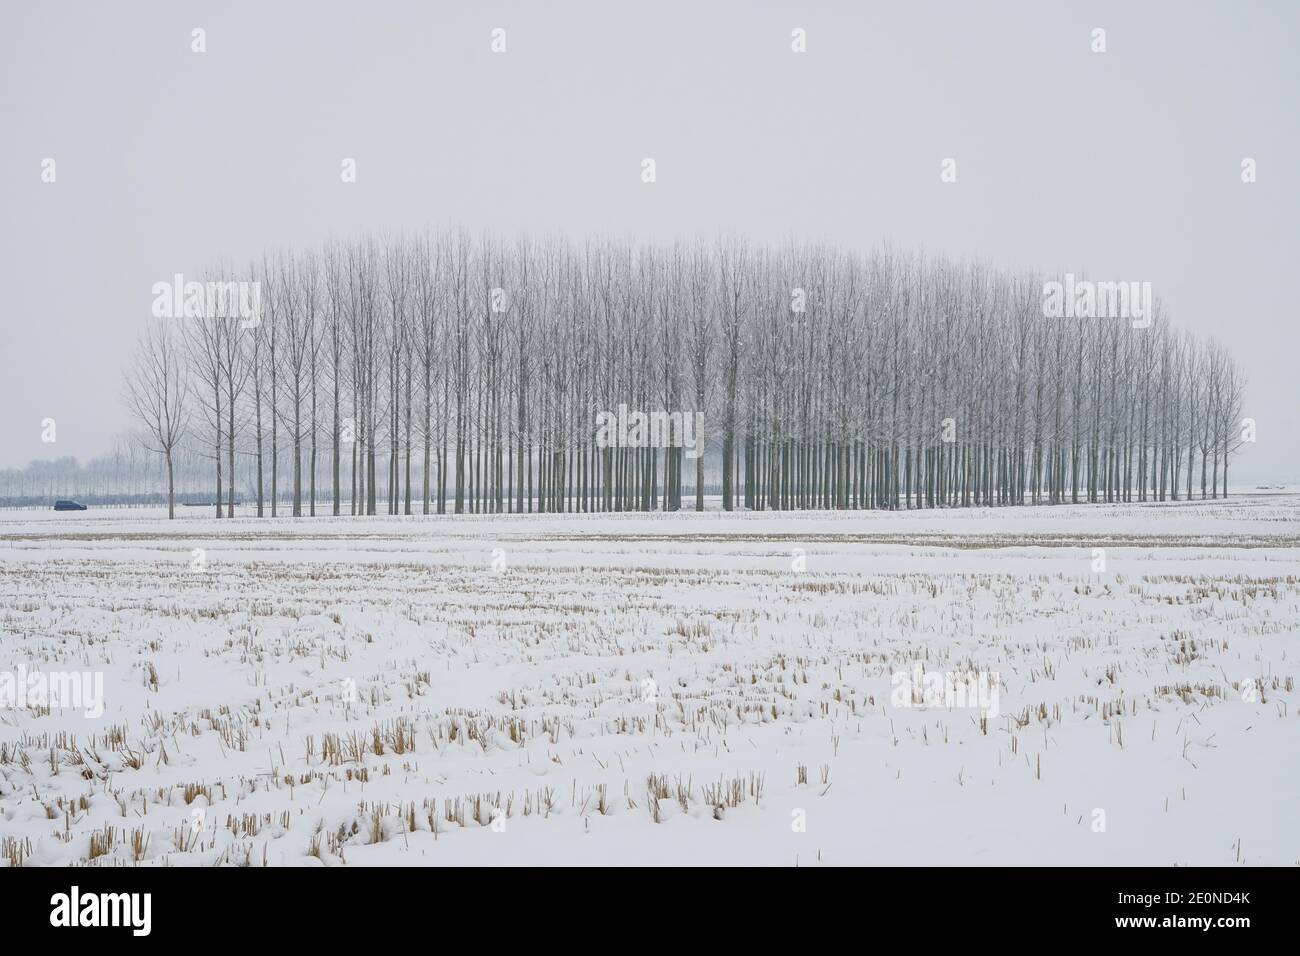 Mortara -12/29/2020: poplar tree with snow with a car passing by in winter landscape Stock Photo